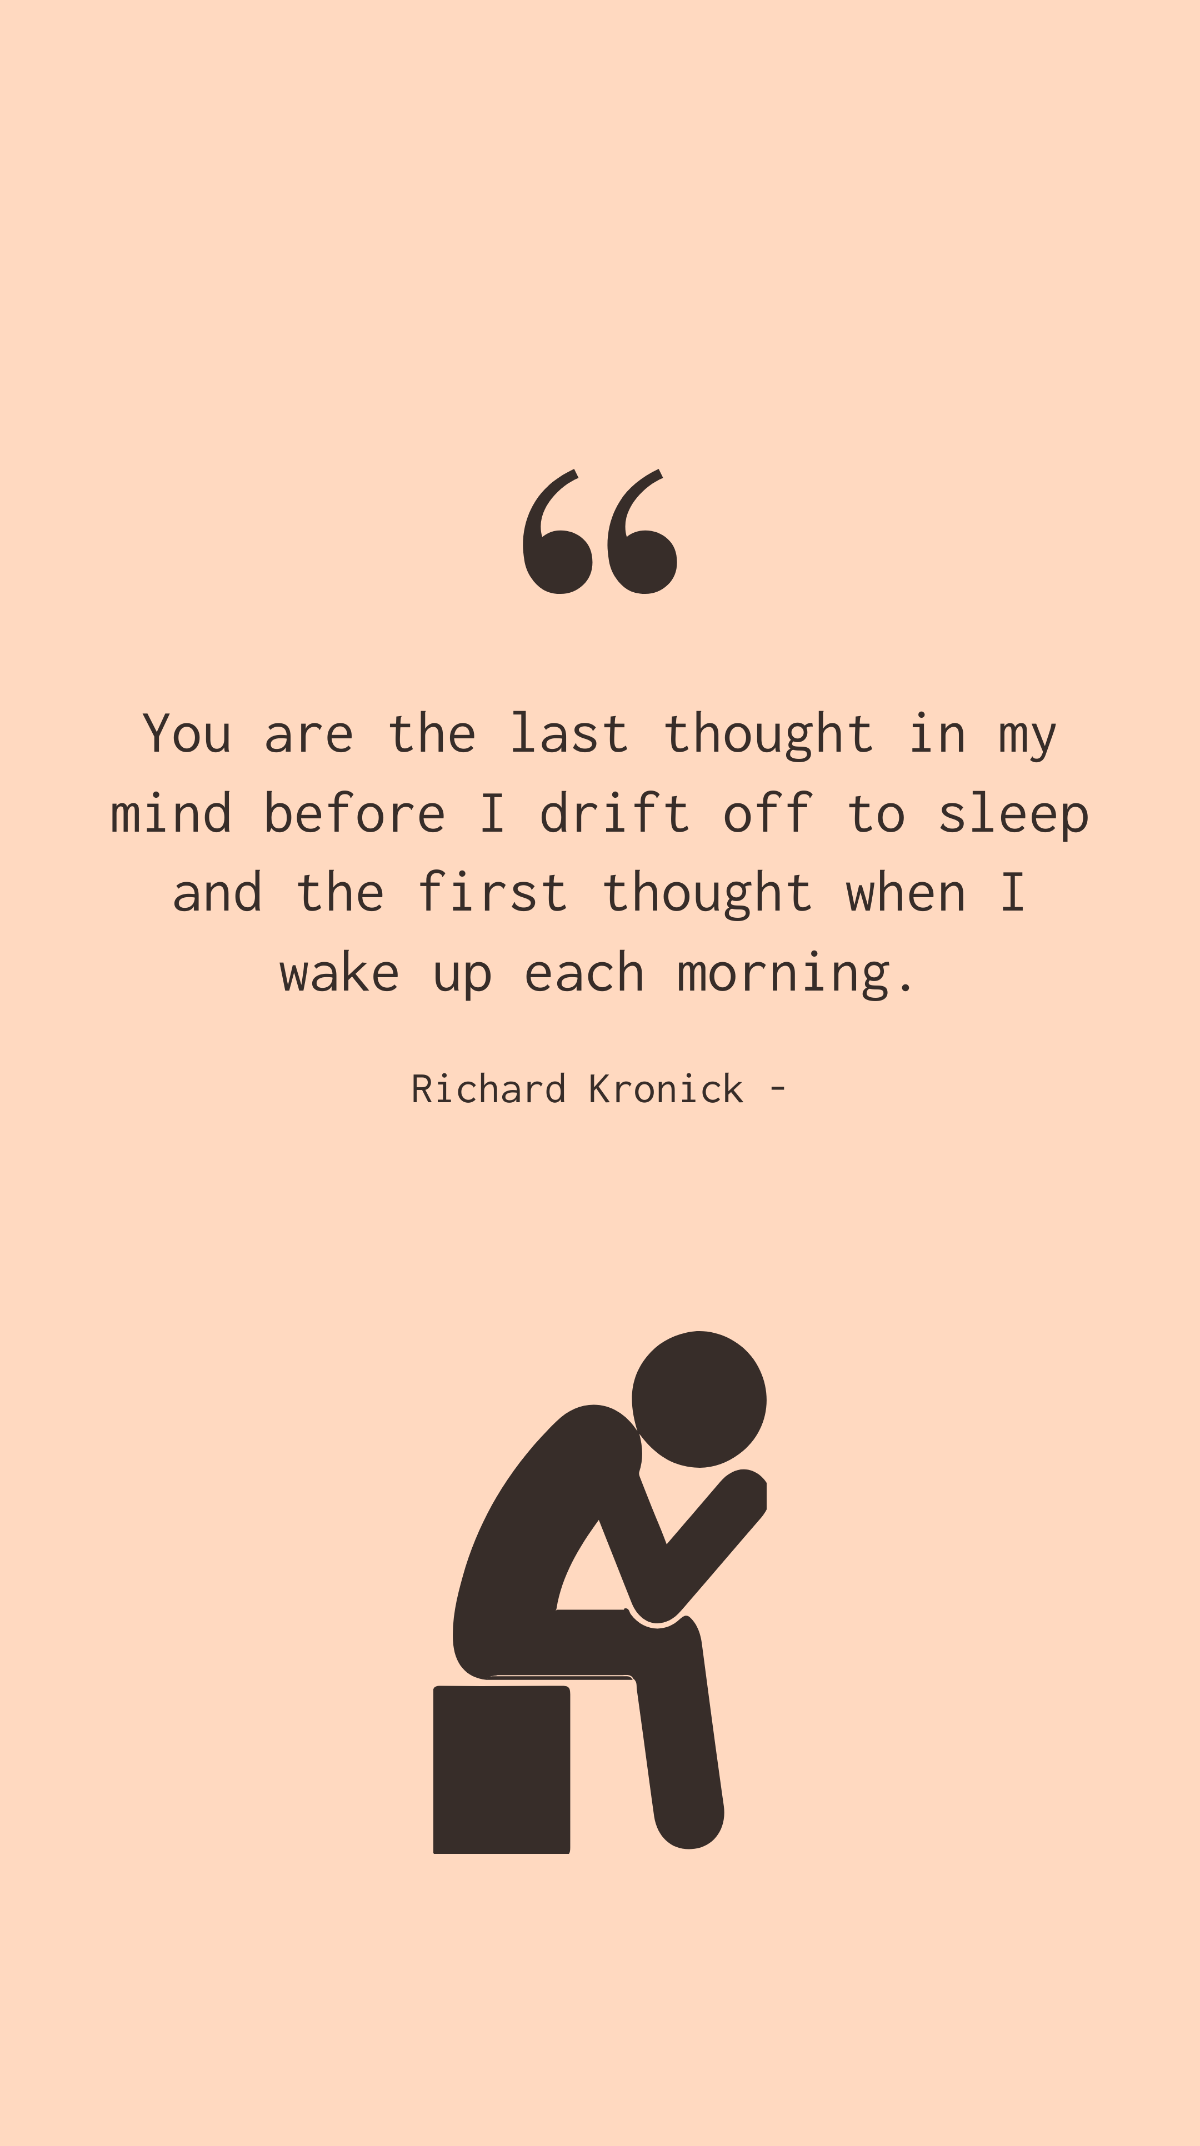 Richard Kronick - You are the last thought in my mind before I drift off to sleep and the first thought when I wake up each morning.